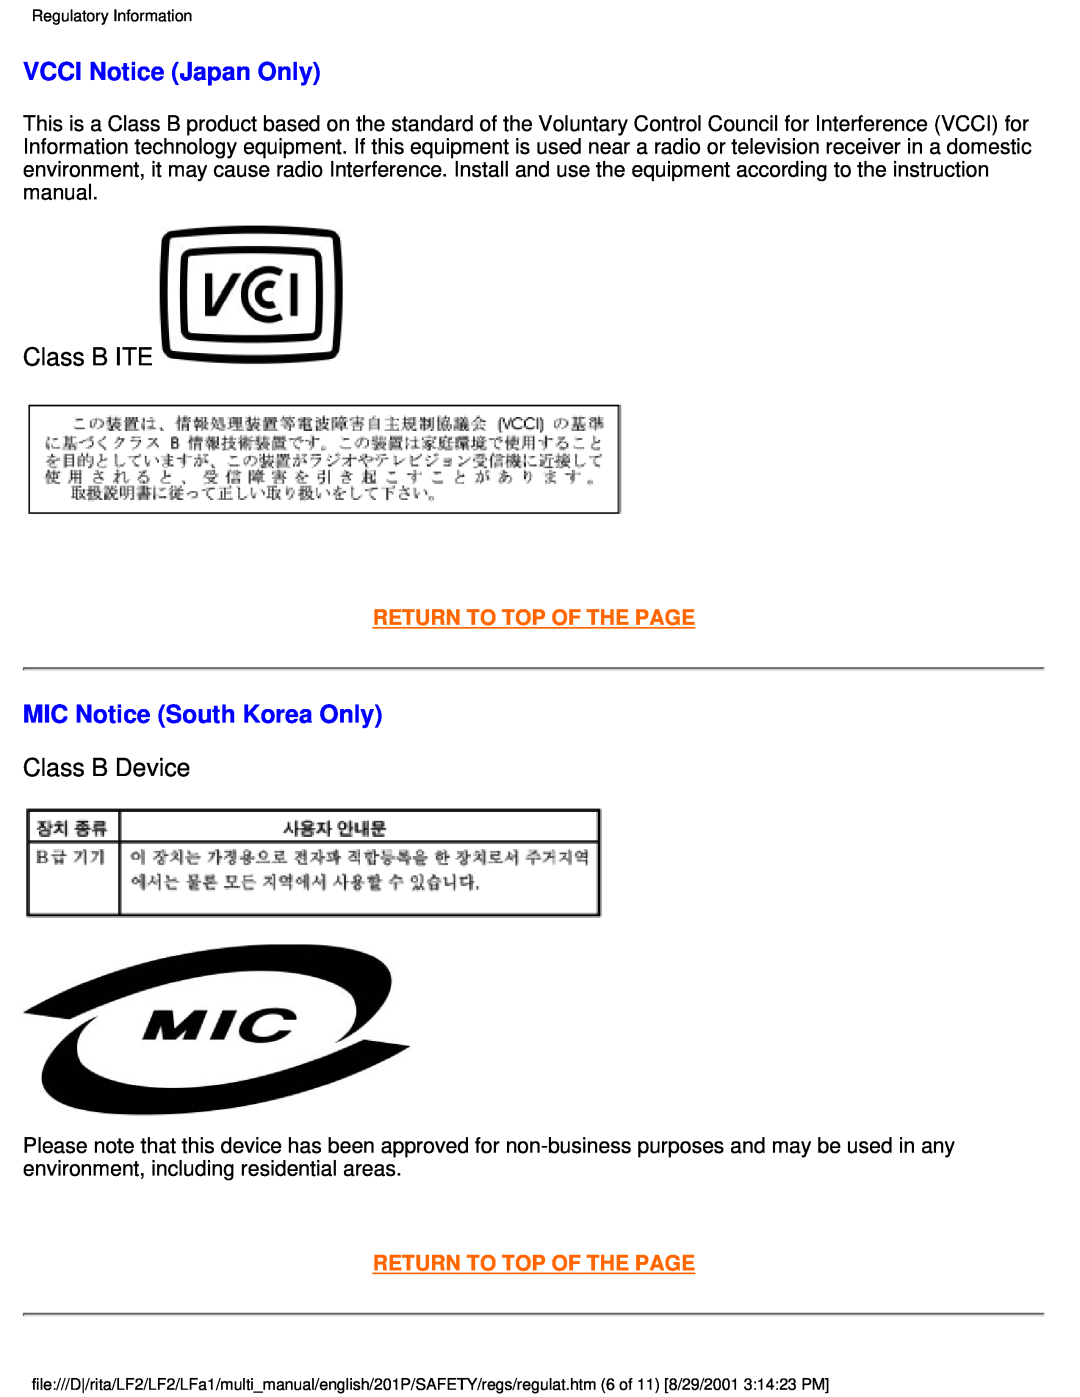 Philips 201P VCCI Notice Japan Only, MIC Notice South Korea Only, Class B ITE, Class B Device, Return To Top Of The Page 